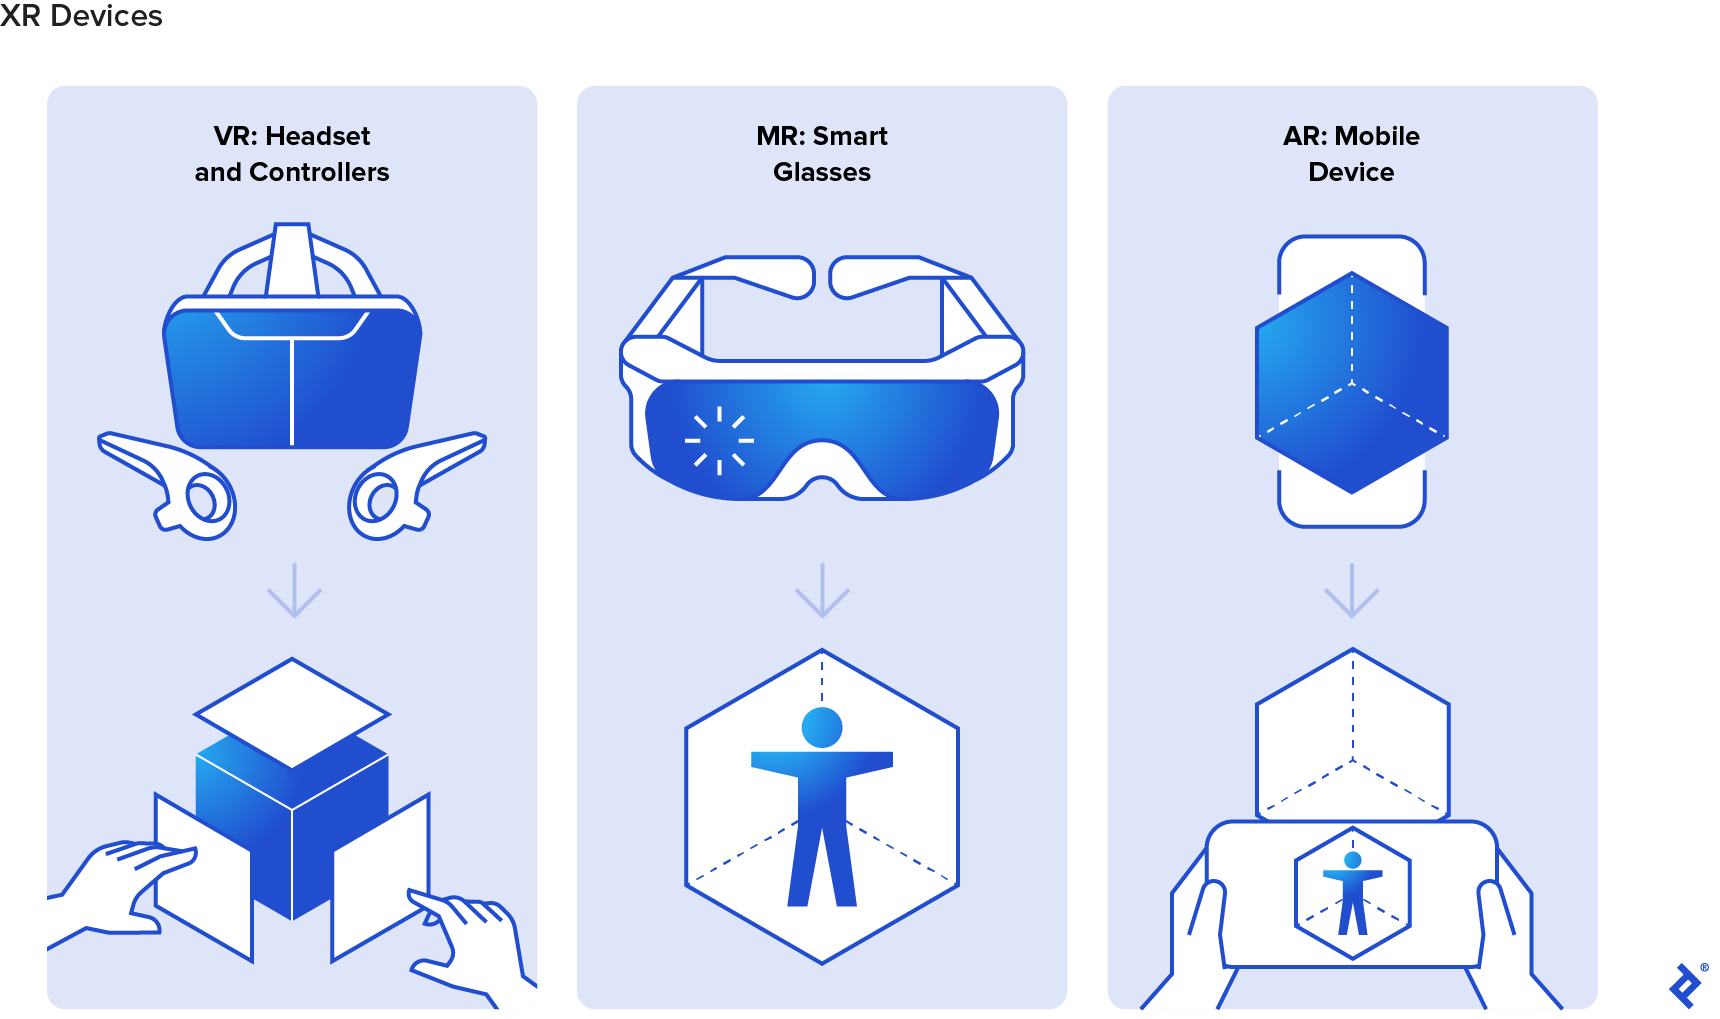 Illustrations of XR devices paired with POV for each device. The devices are "VR: Headset and Controllers," "MR: Smart Glasses," and "AR: Mobile Device. The POV for VR shows virtual hands interacting with virtual imagery. The POV for MR shows a virtual person overlaid on a real-world backdrop. The POV for AR shows real hands holding a mobile device over a real-world environment, and overlaying the virtual person on the screen."